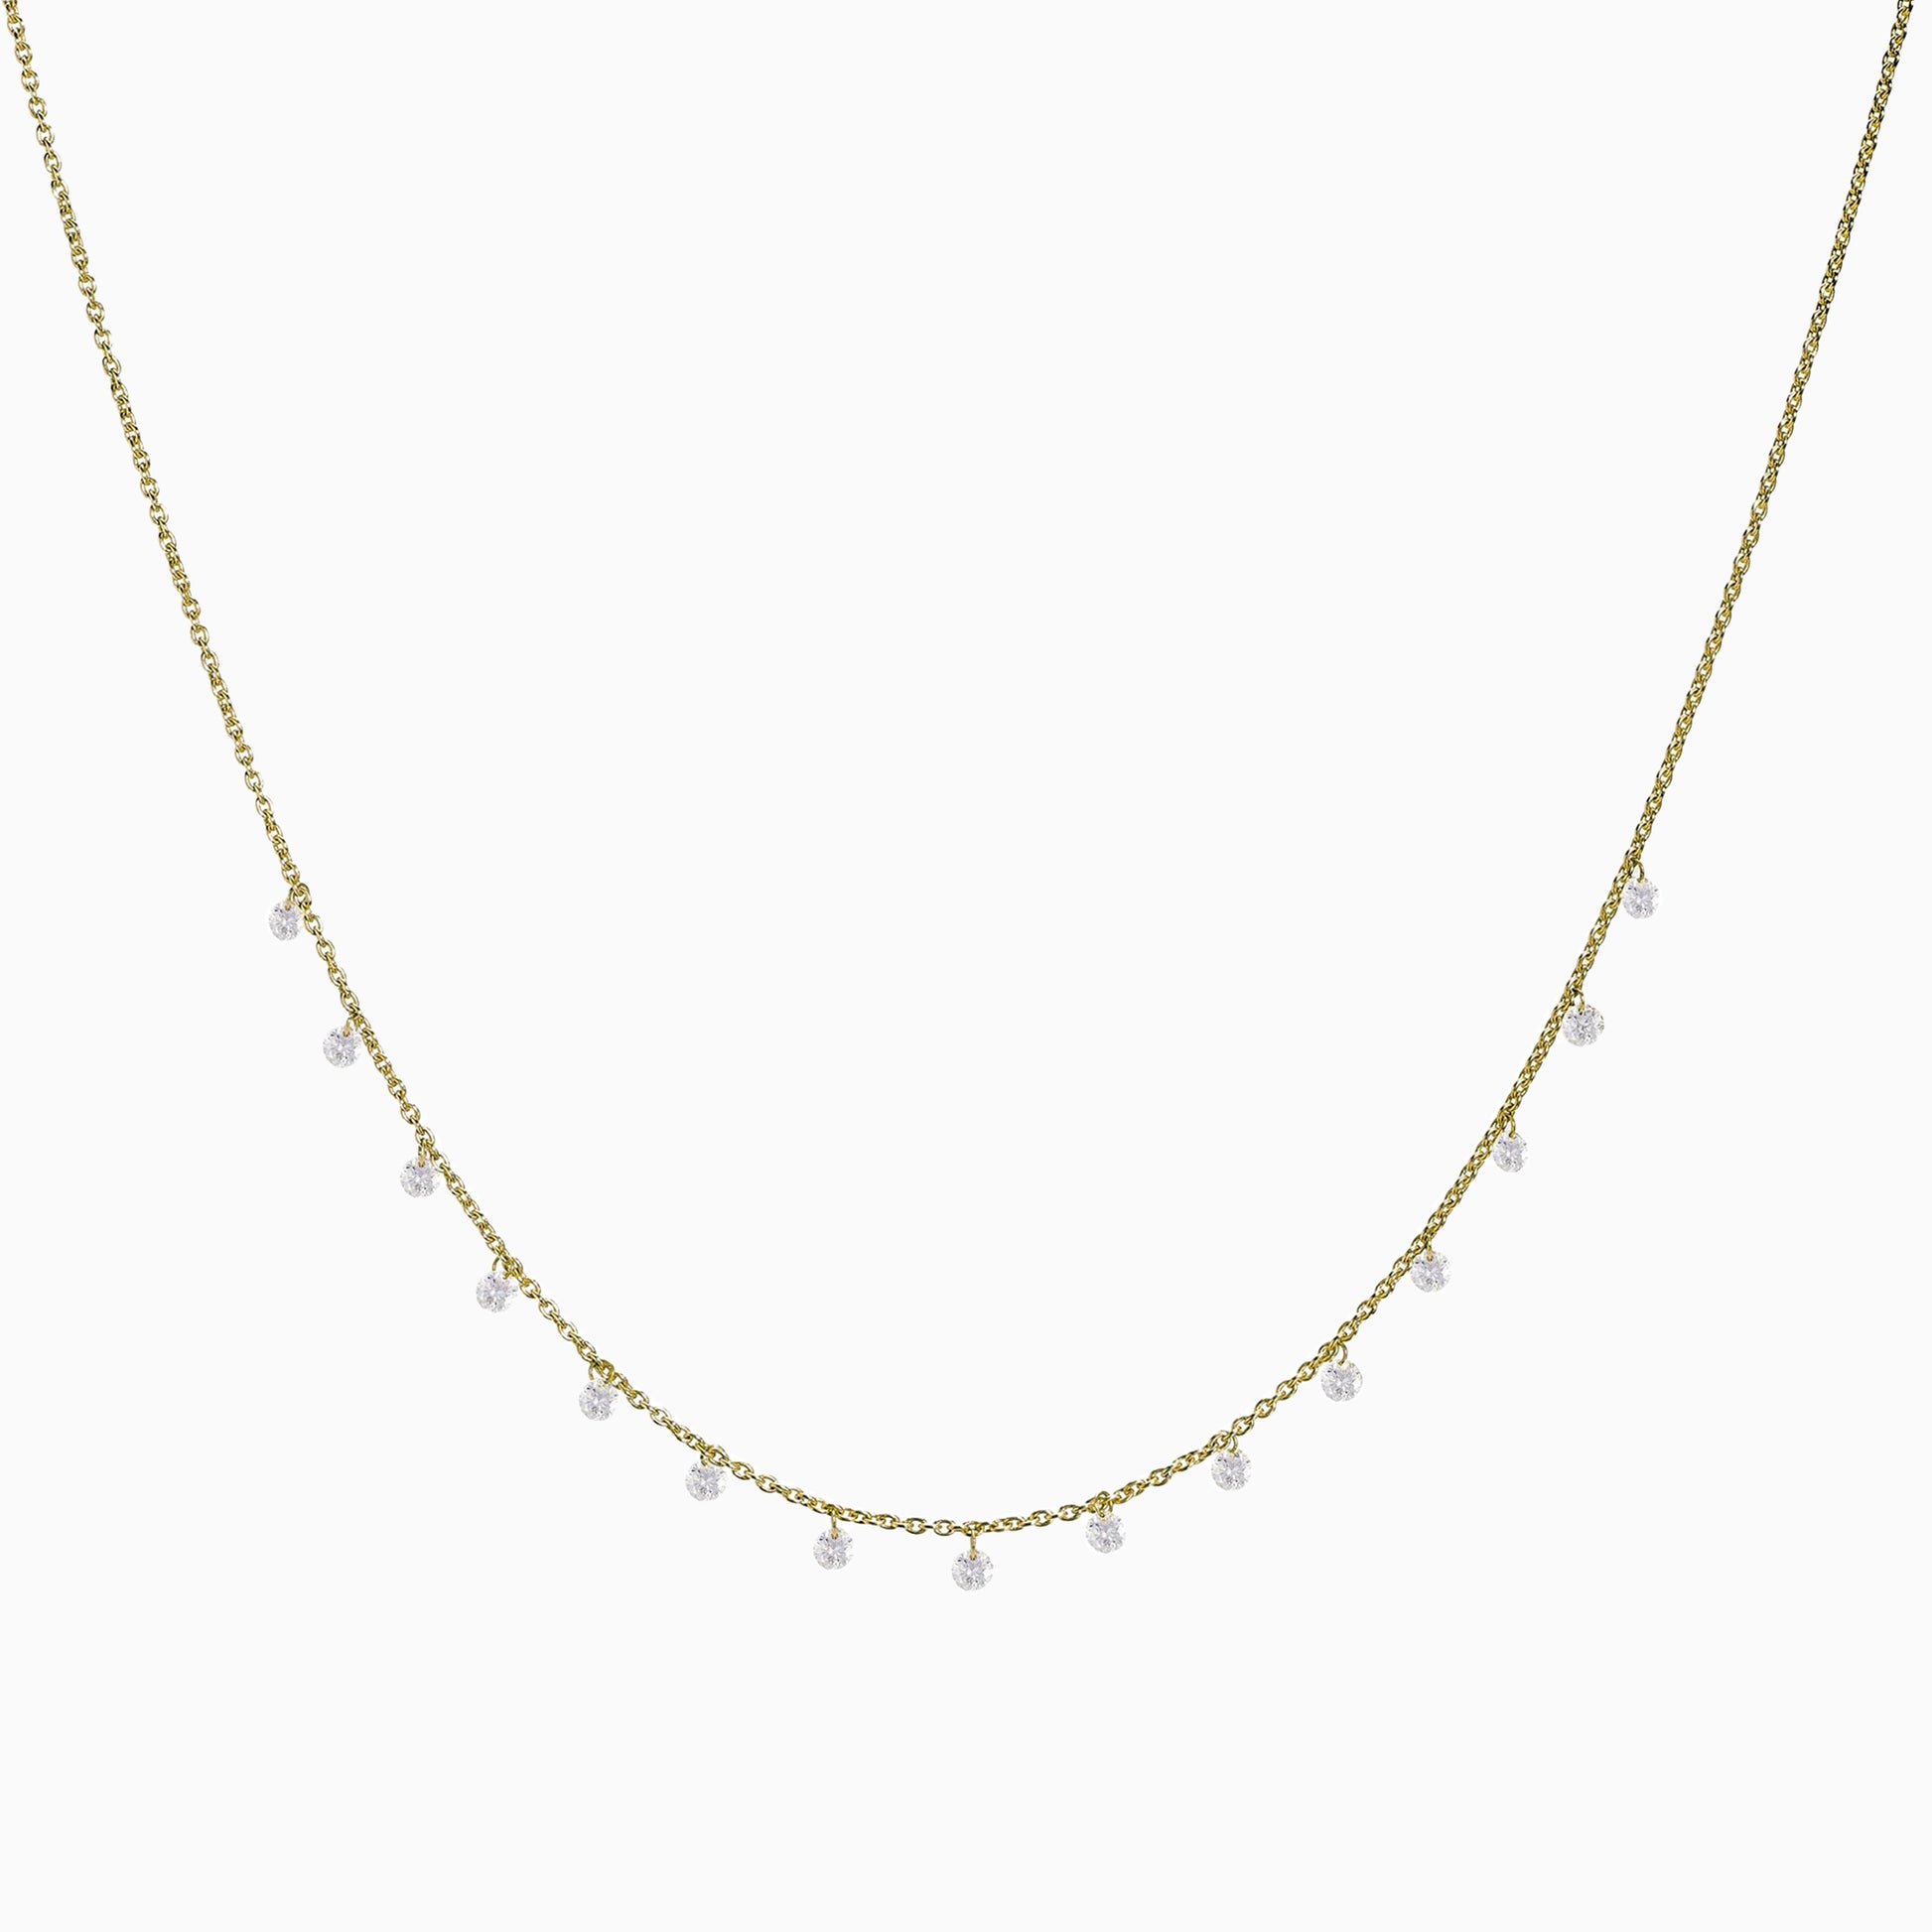 Floating Diamonds Necklace in Yellow Gold on a white background